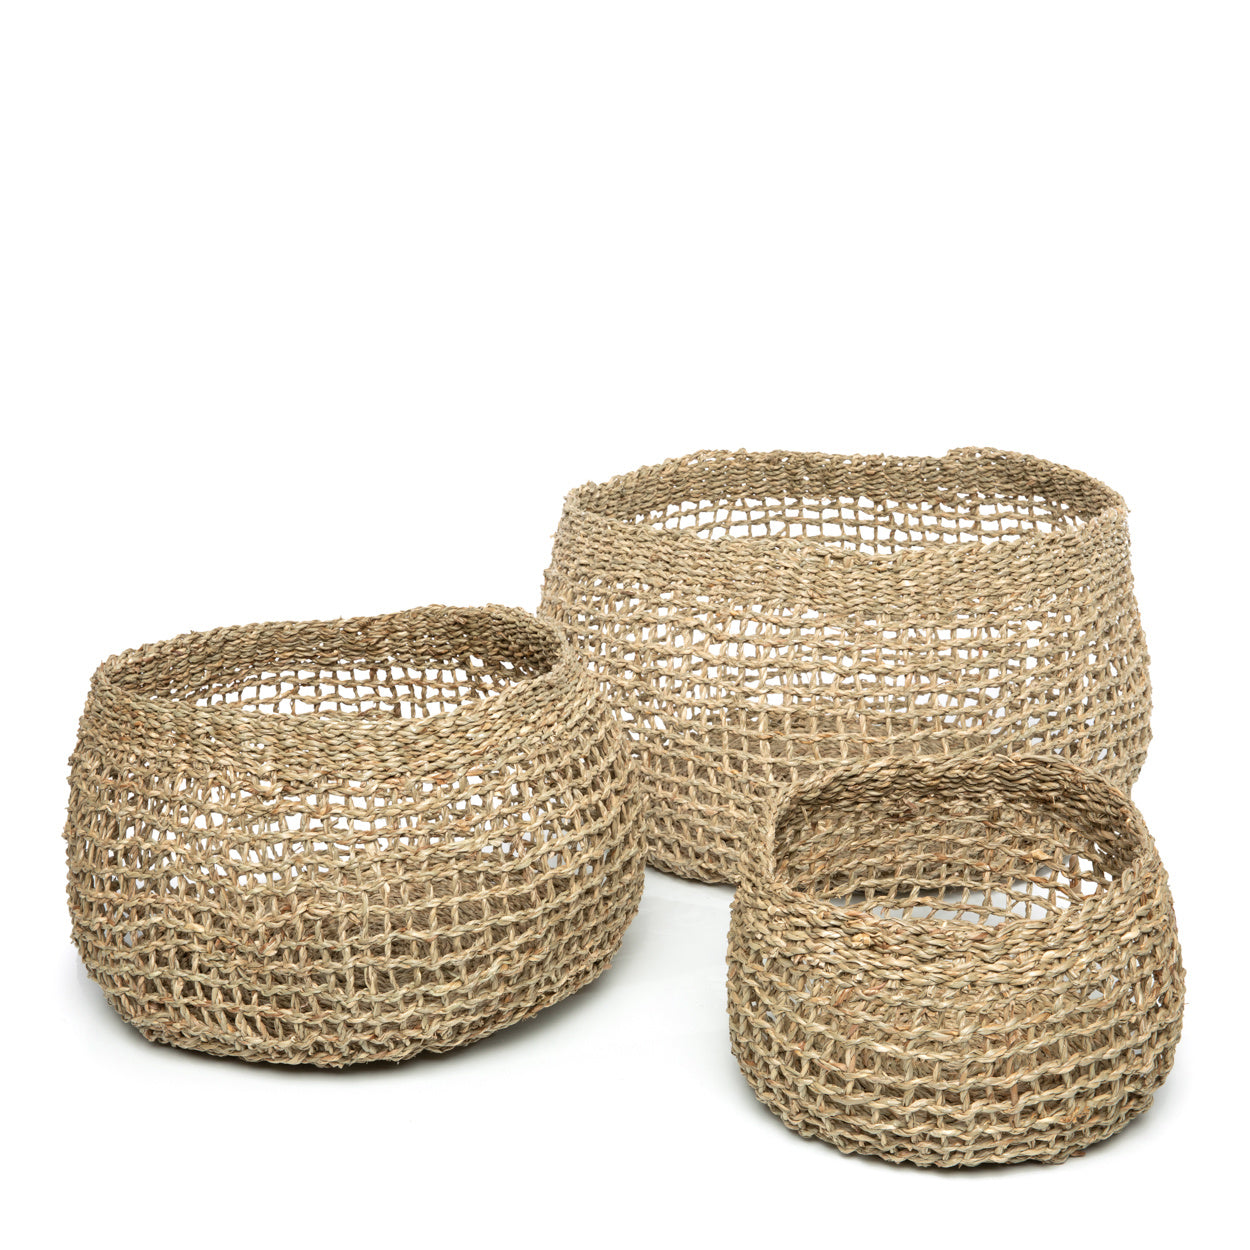 THE BAI NHAT Baskets Set of 3 front view